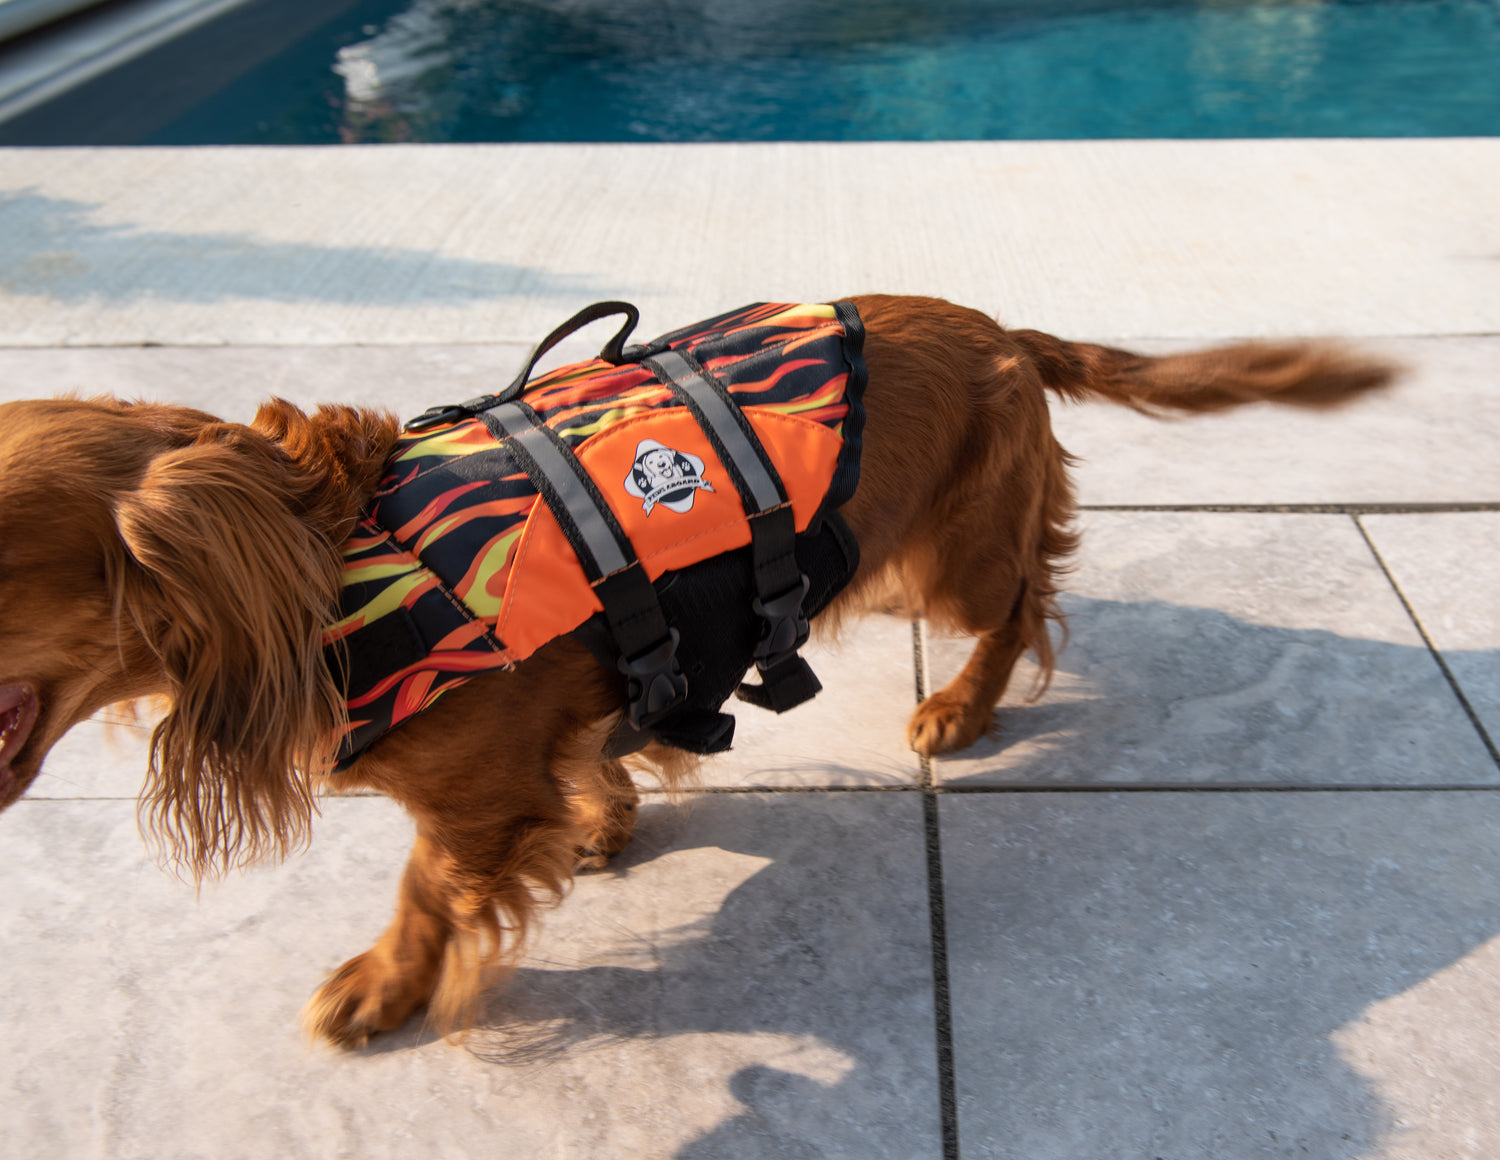 Long haired dachshund wearing Paws Aboard dog life jacket in Racing Flames pattern with reflective straps and top handle.  This active dog is walking on white porcelain tile near a near a swimming pool.